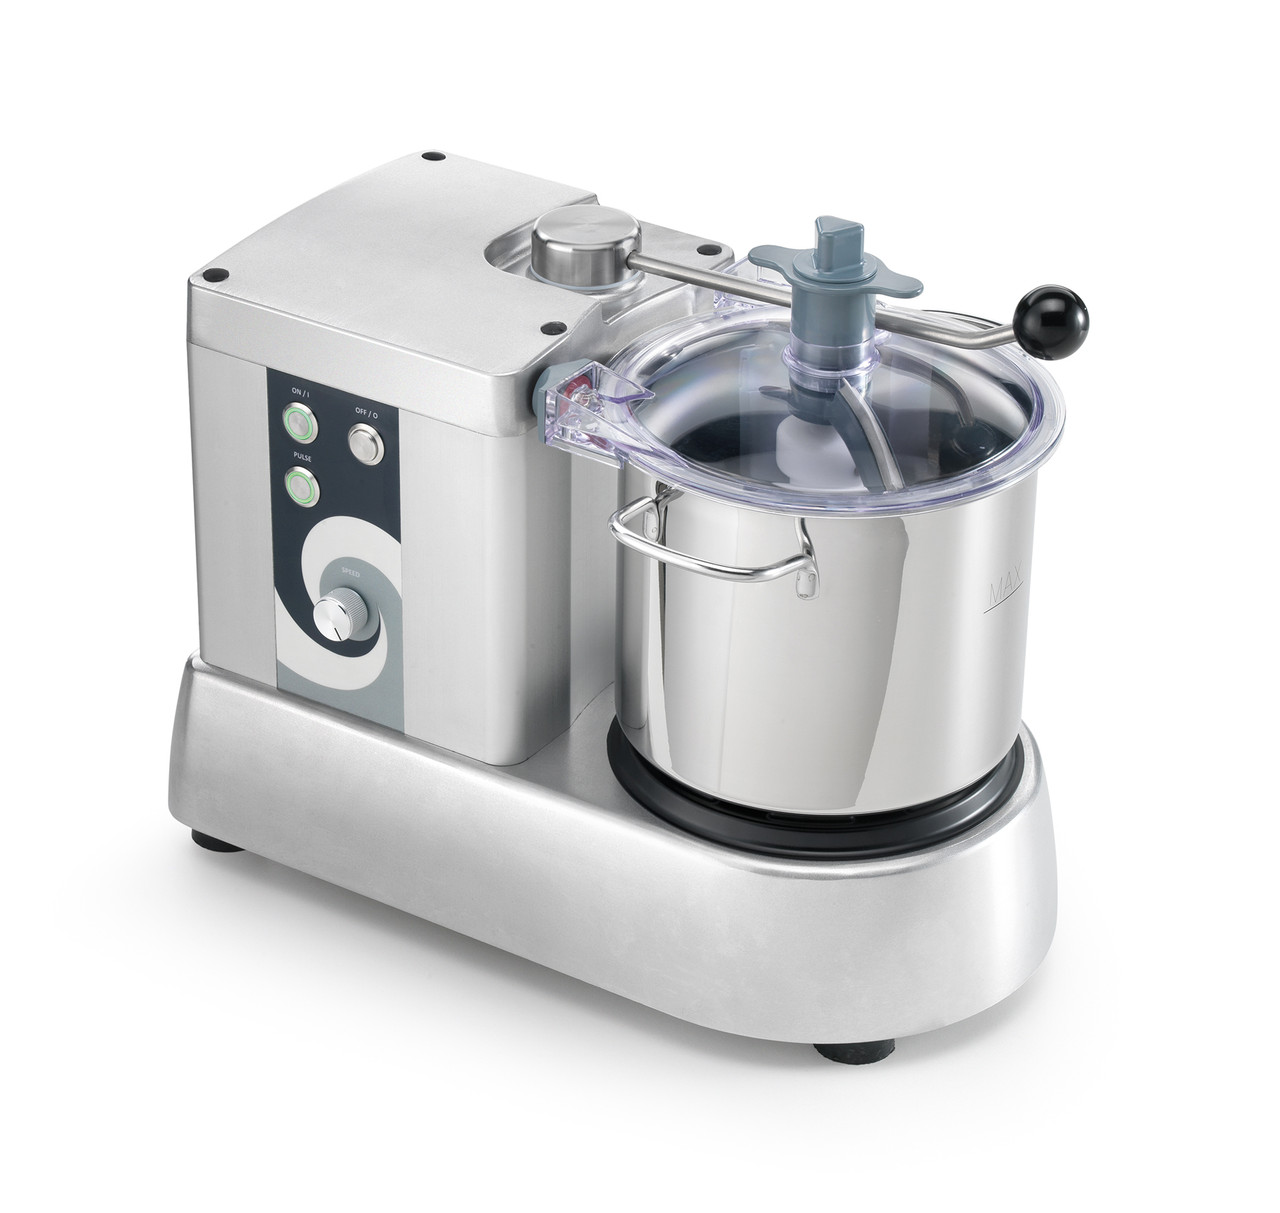 Eurodib 9.4L (2.5 gal) Continuous Commercial Food Processor, Model# CTRONIC 9VT